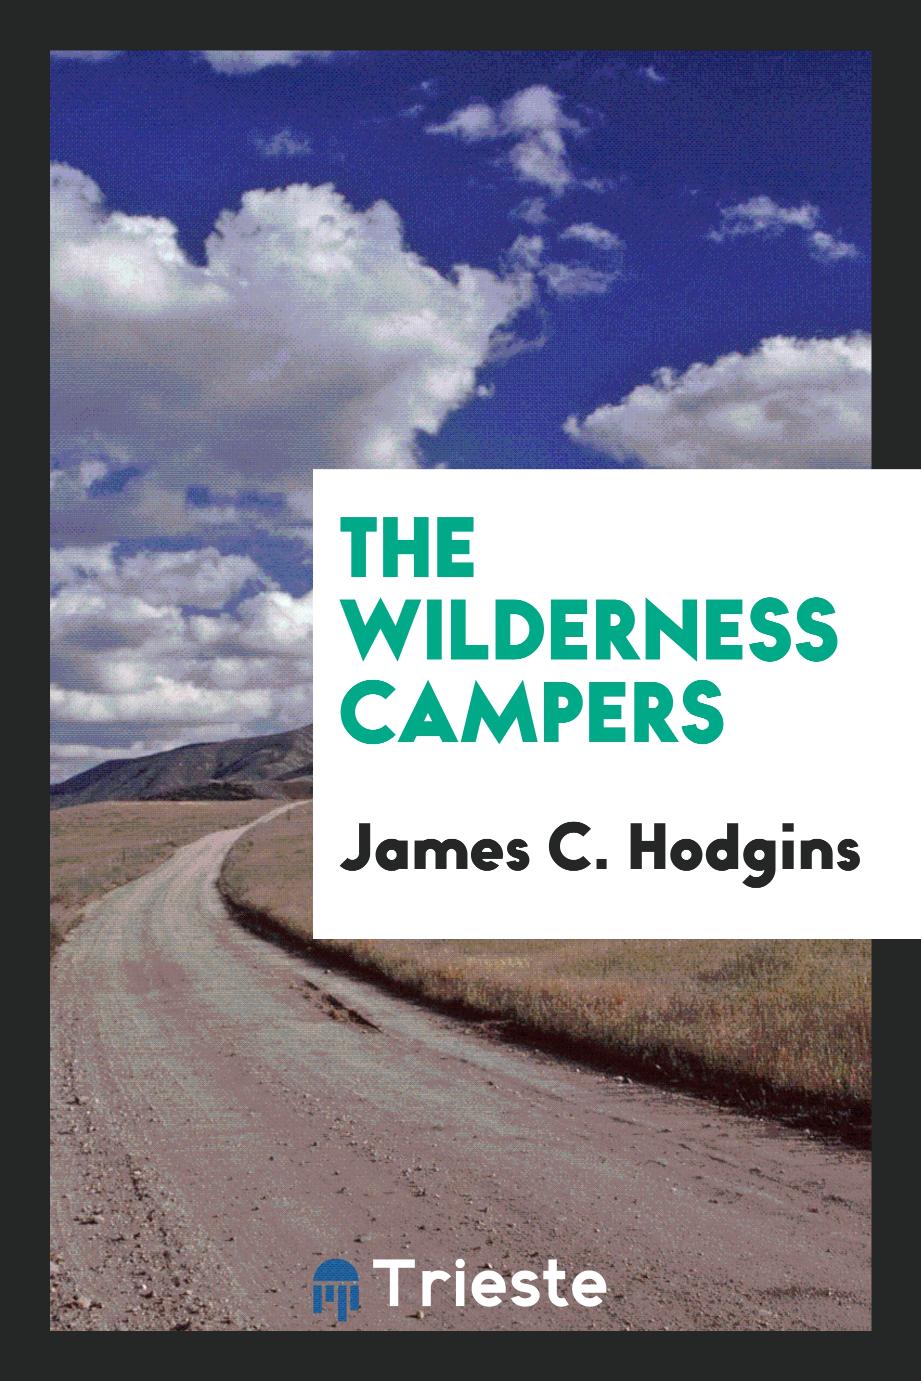 The wilderness campers